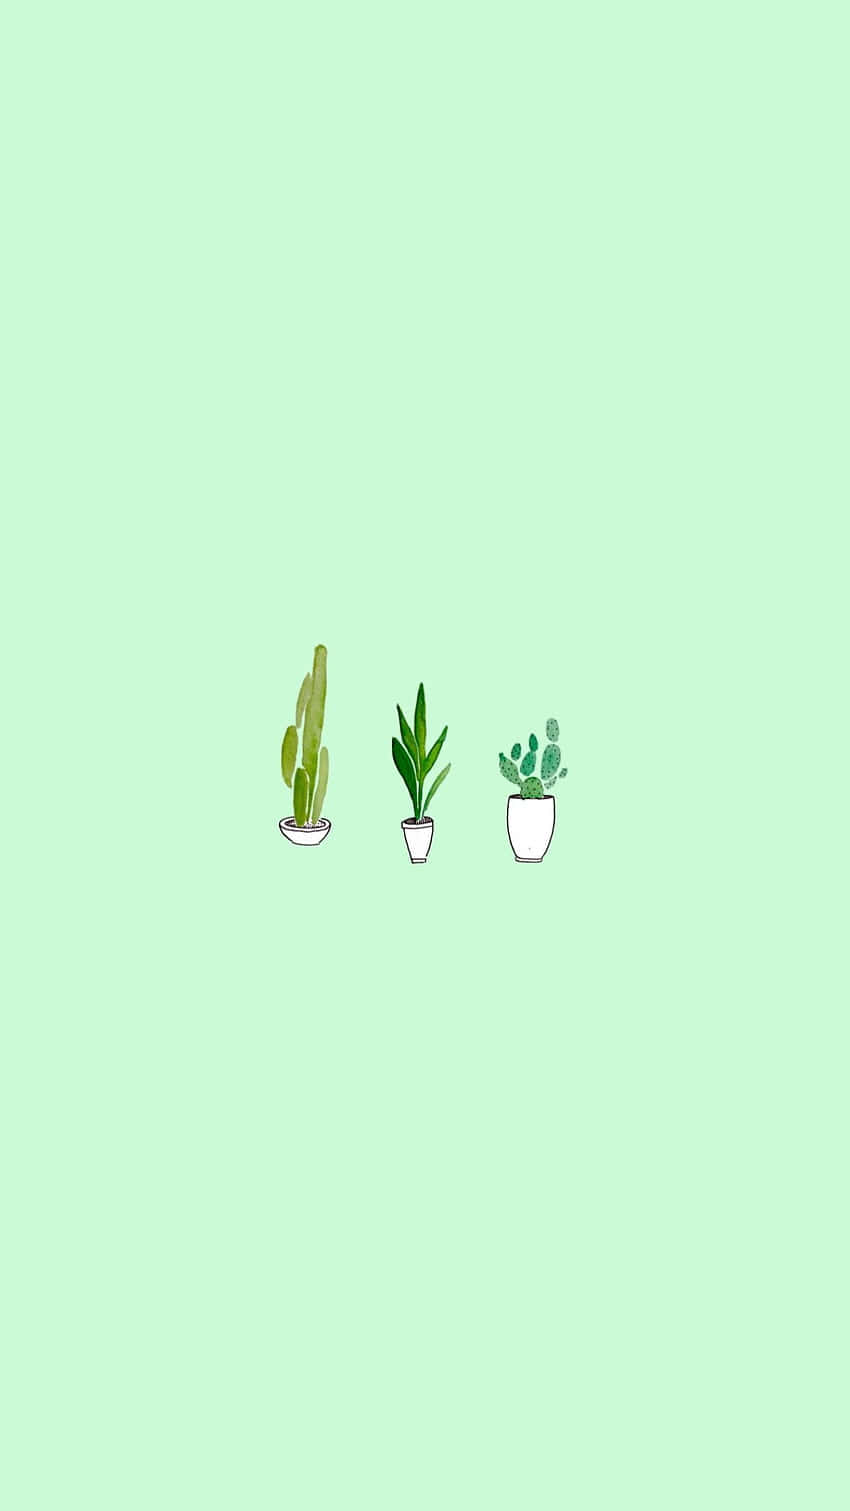 Cute Sage Green Cactus And Two House Plants Background